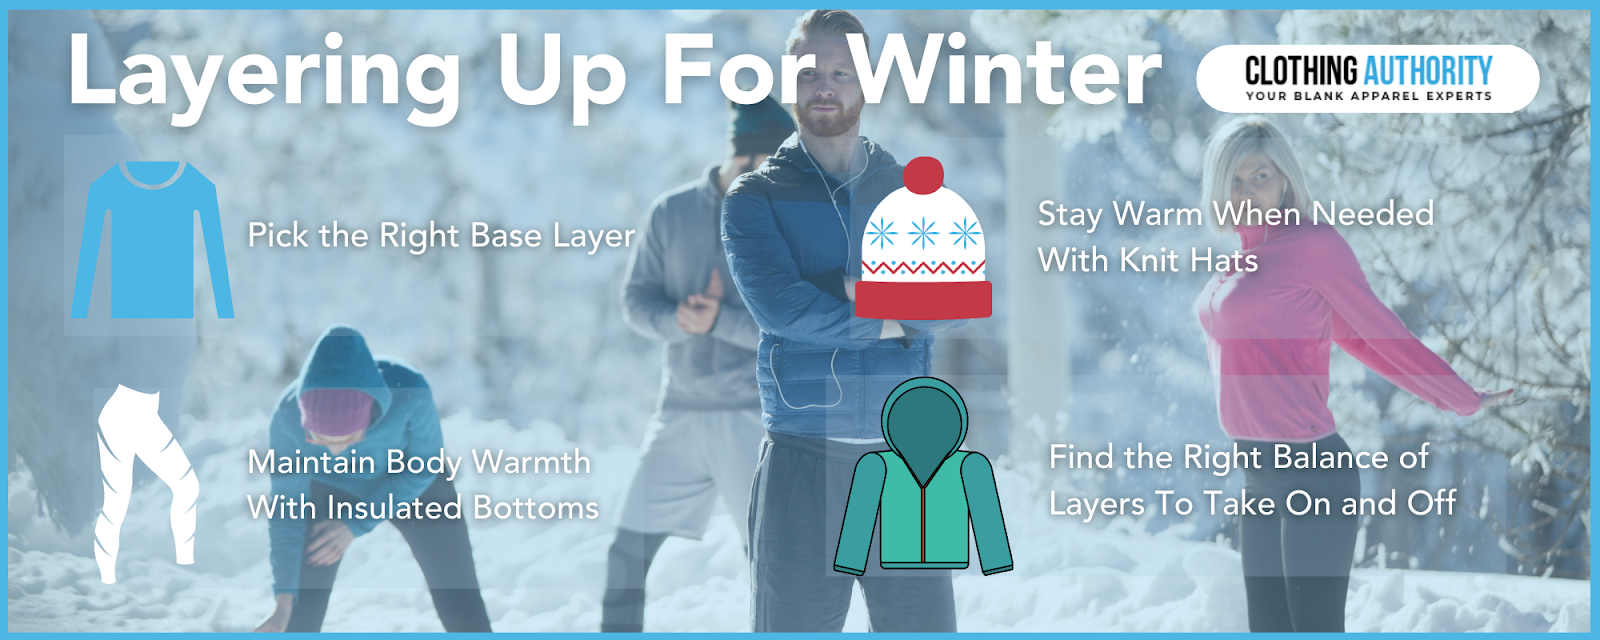 Image demonstrating essential layering tips for winter outdoor workouts, Clothing Authority Blog.